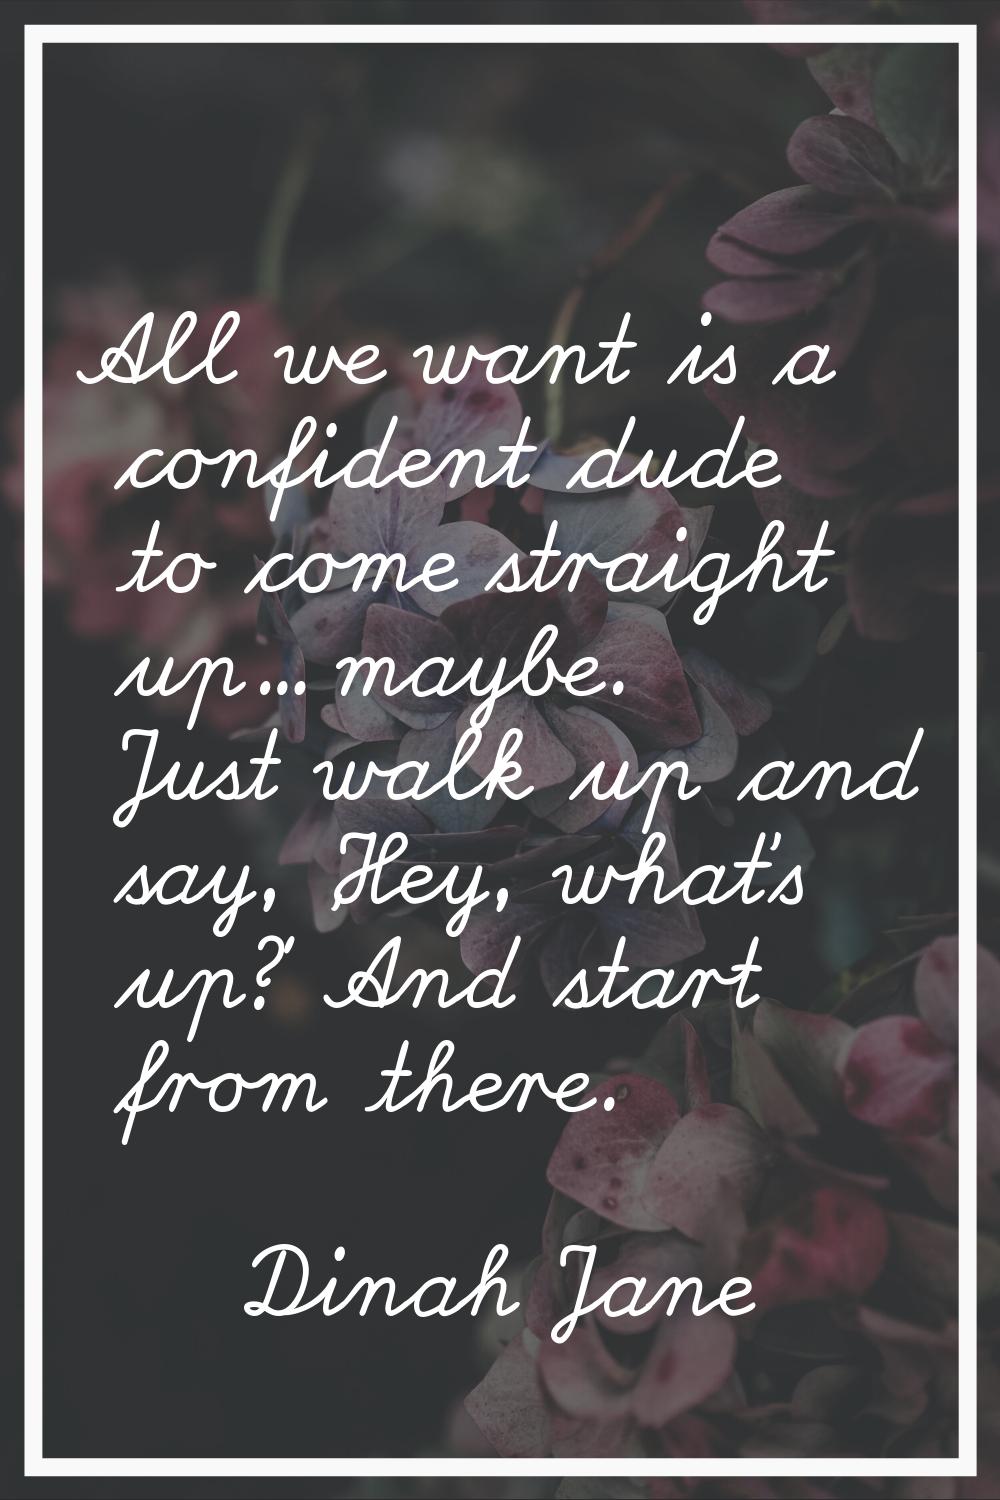 All we want is a confident dude to come straight up... maybe. Just walk up and say, 'Hey, what's up